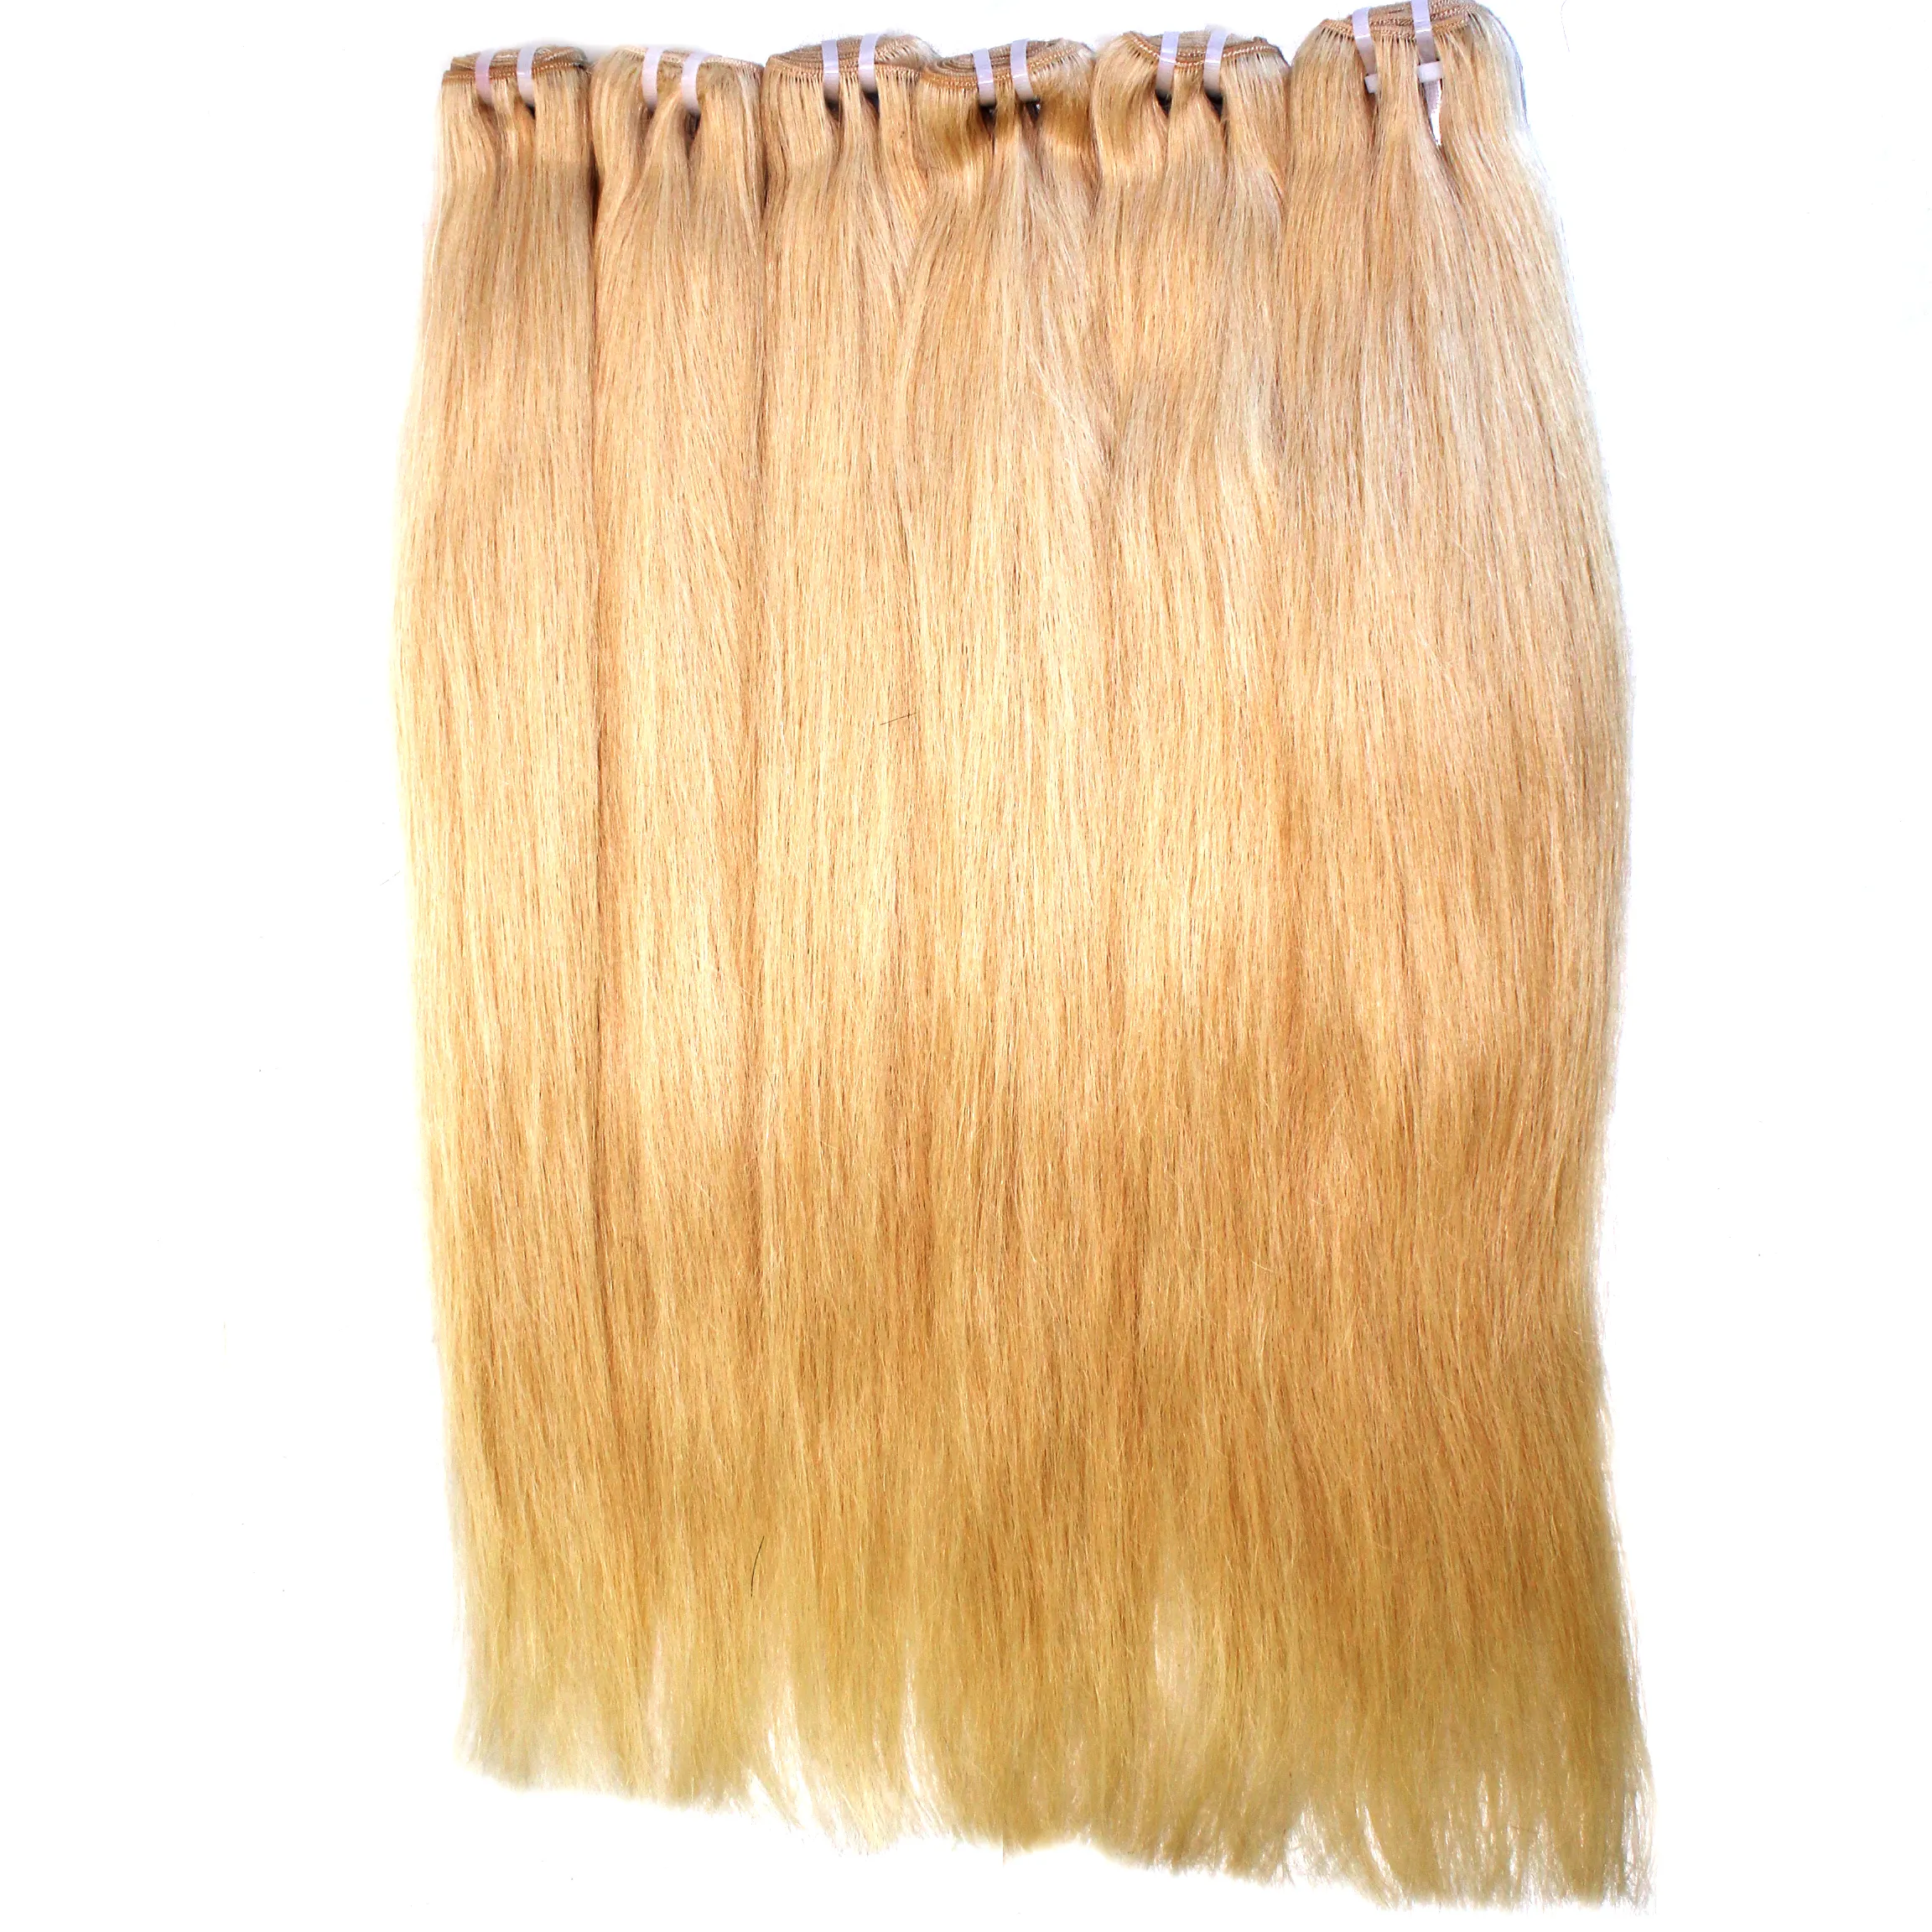 Soft hand tied weft hair extension 100% Human Hair, Cheaper Vendor That Sold The Most Virgin Hair Extension Wavy Blonde